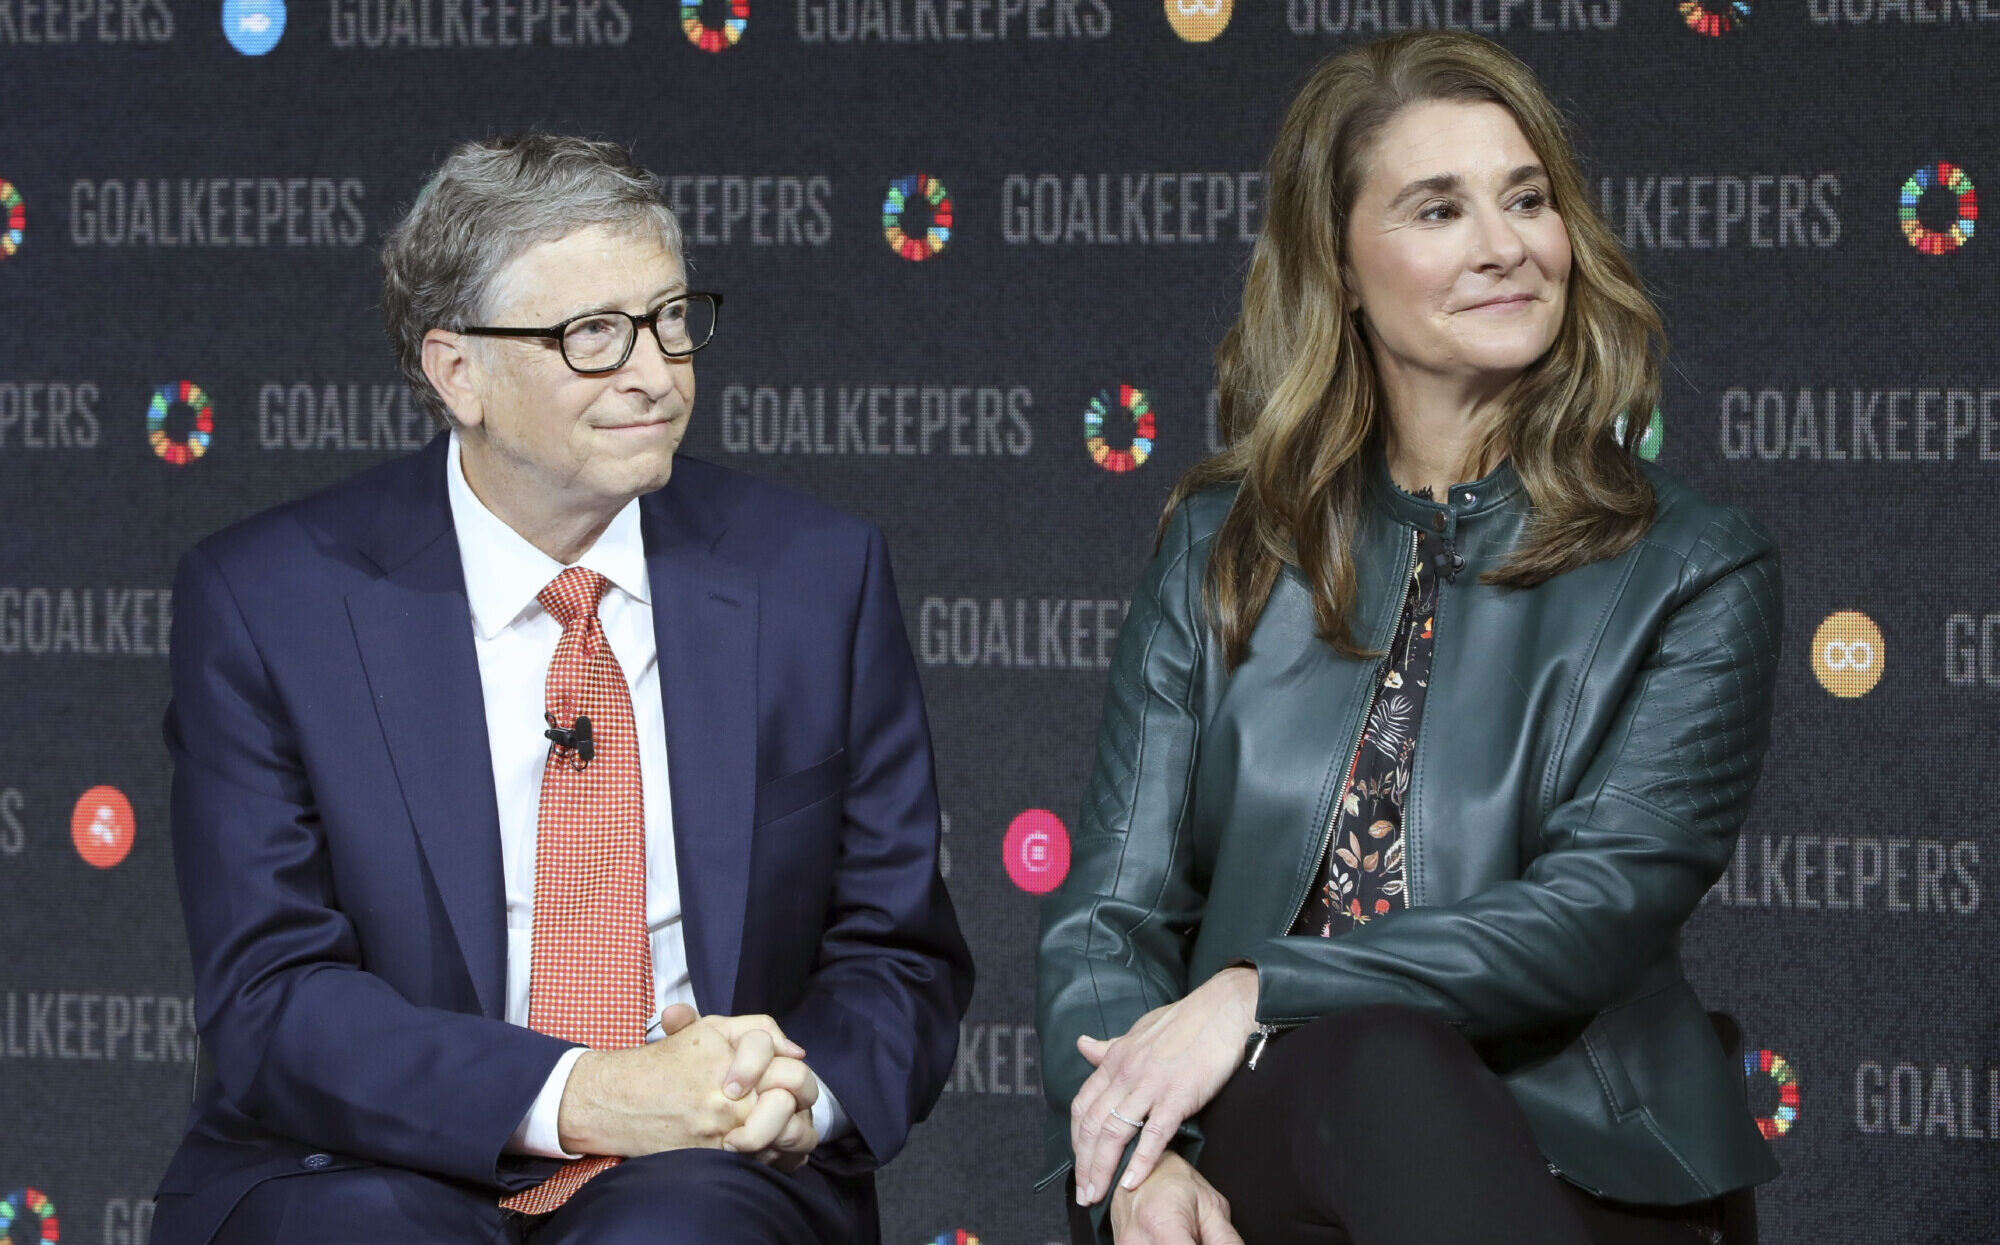 Bill and Melinda Gates Announce Divorce After 27 Years